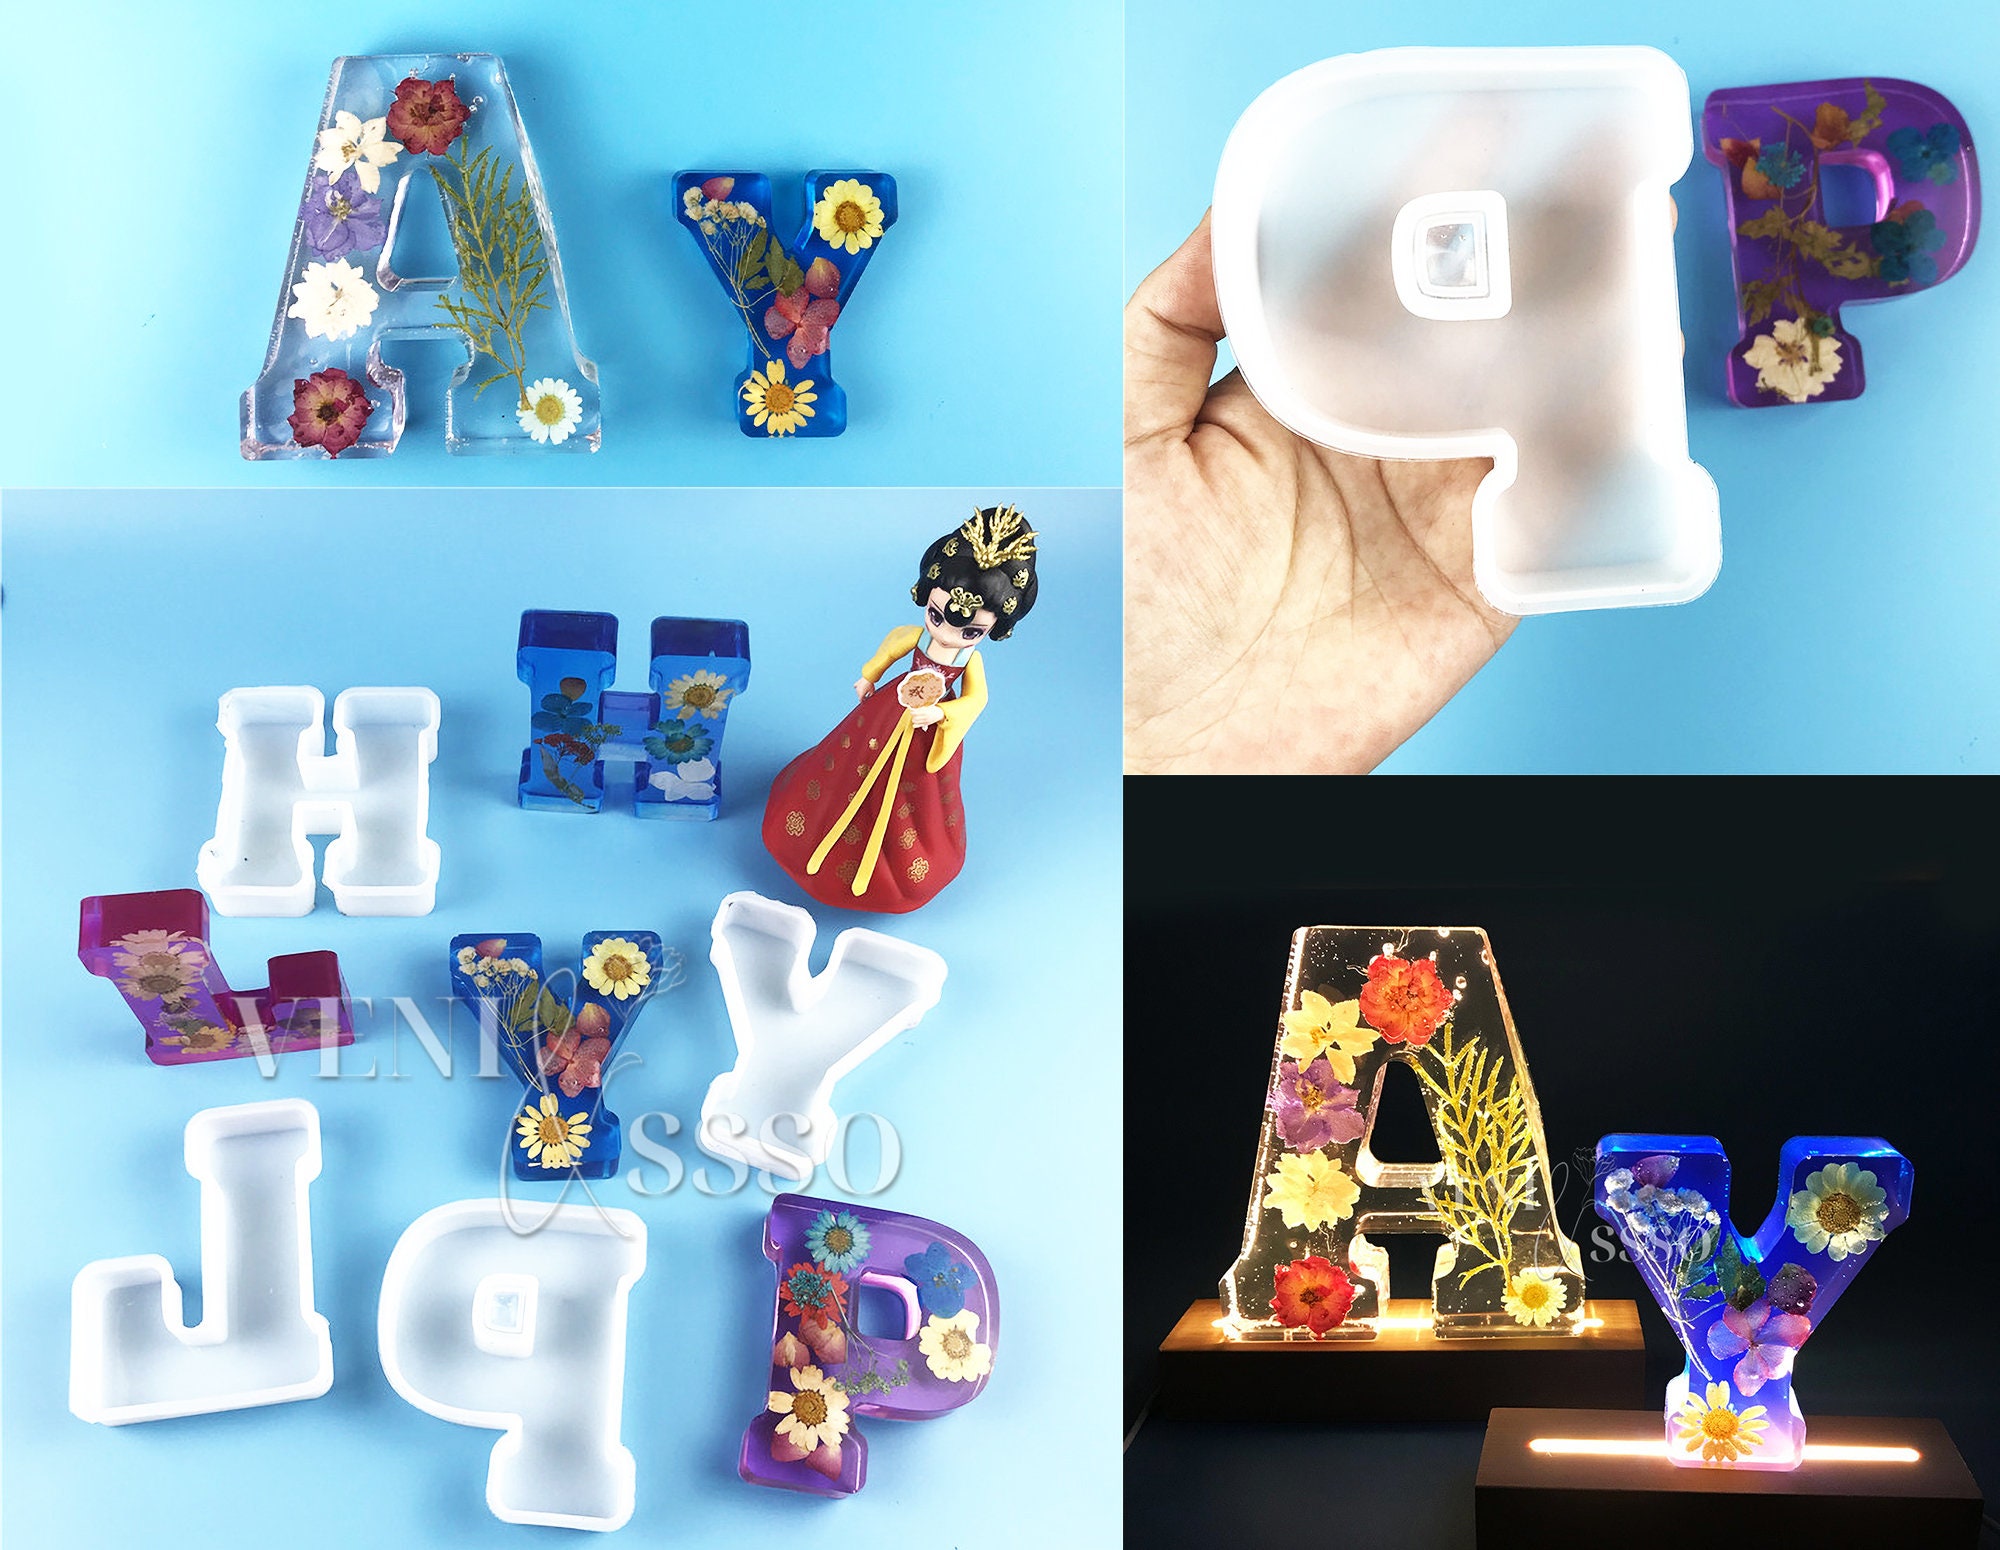 Pixel Alphabet Silicone Mold (26 Cavity) | Large Capital Letters Mold | Big  Uppercase Letter A to Z Mold | Resin Mould Supplies (38mm)